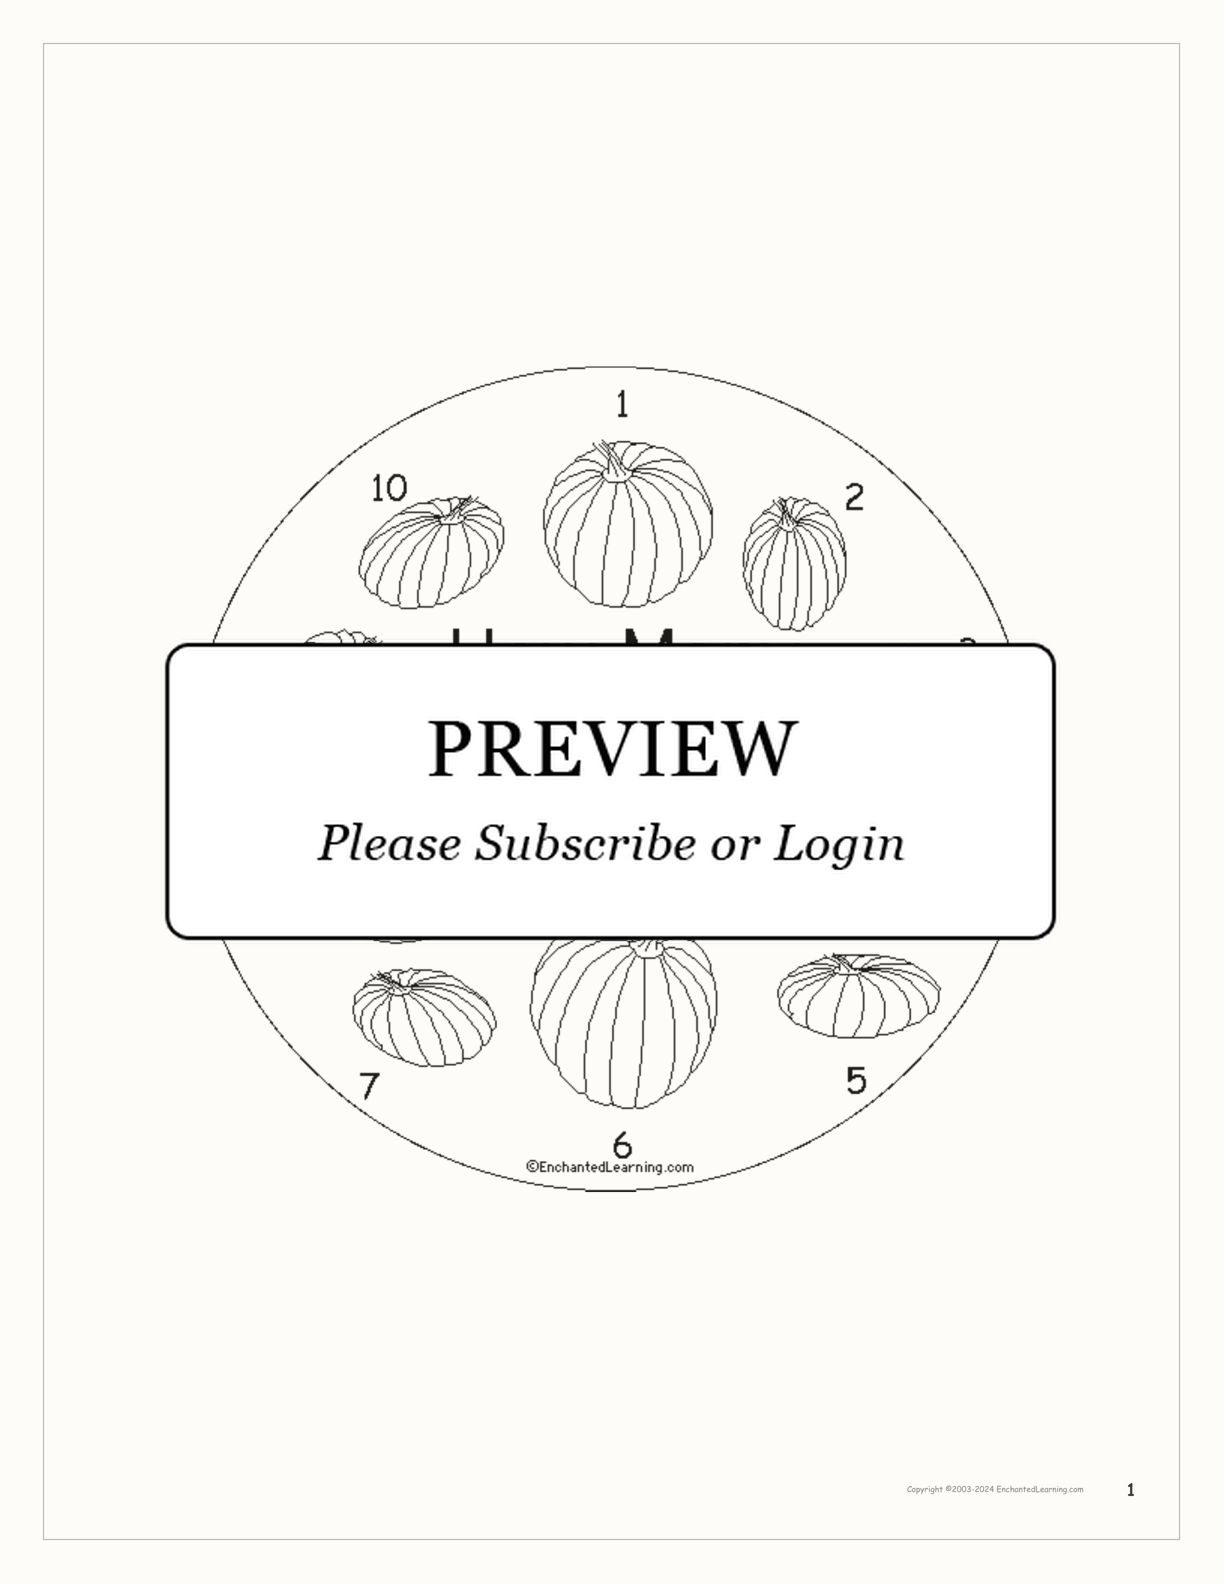 How Many Pumpkins? interactive printout page 1